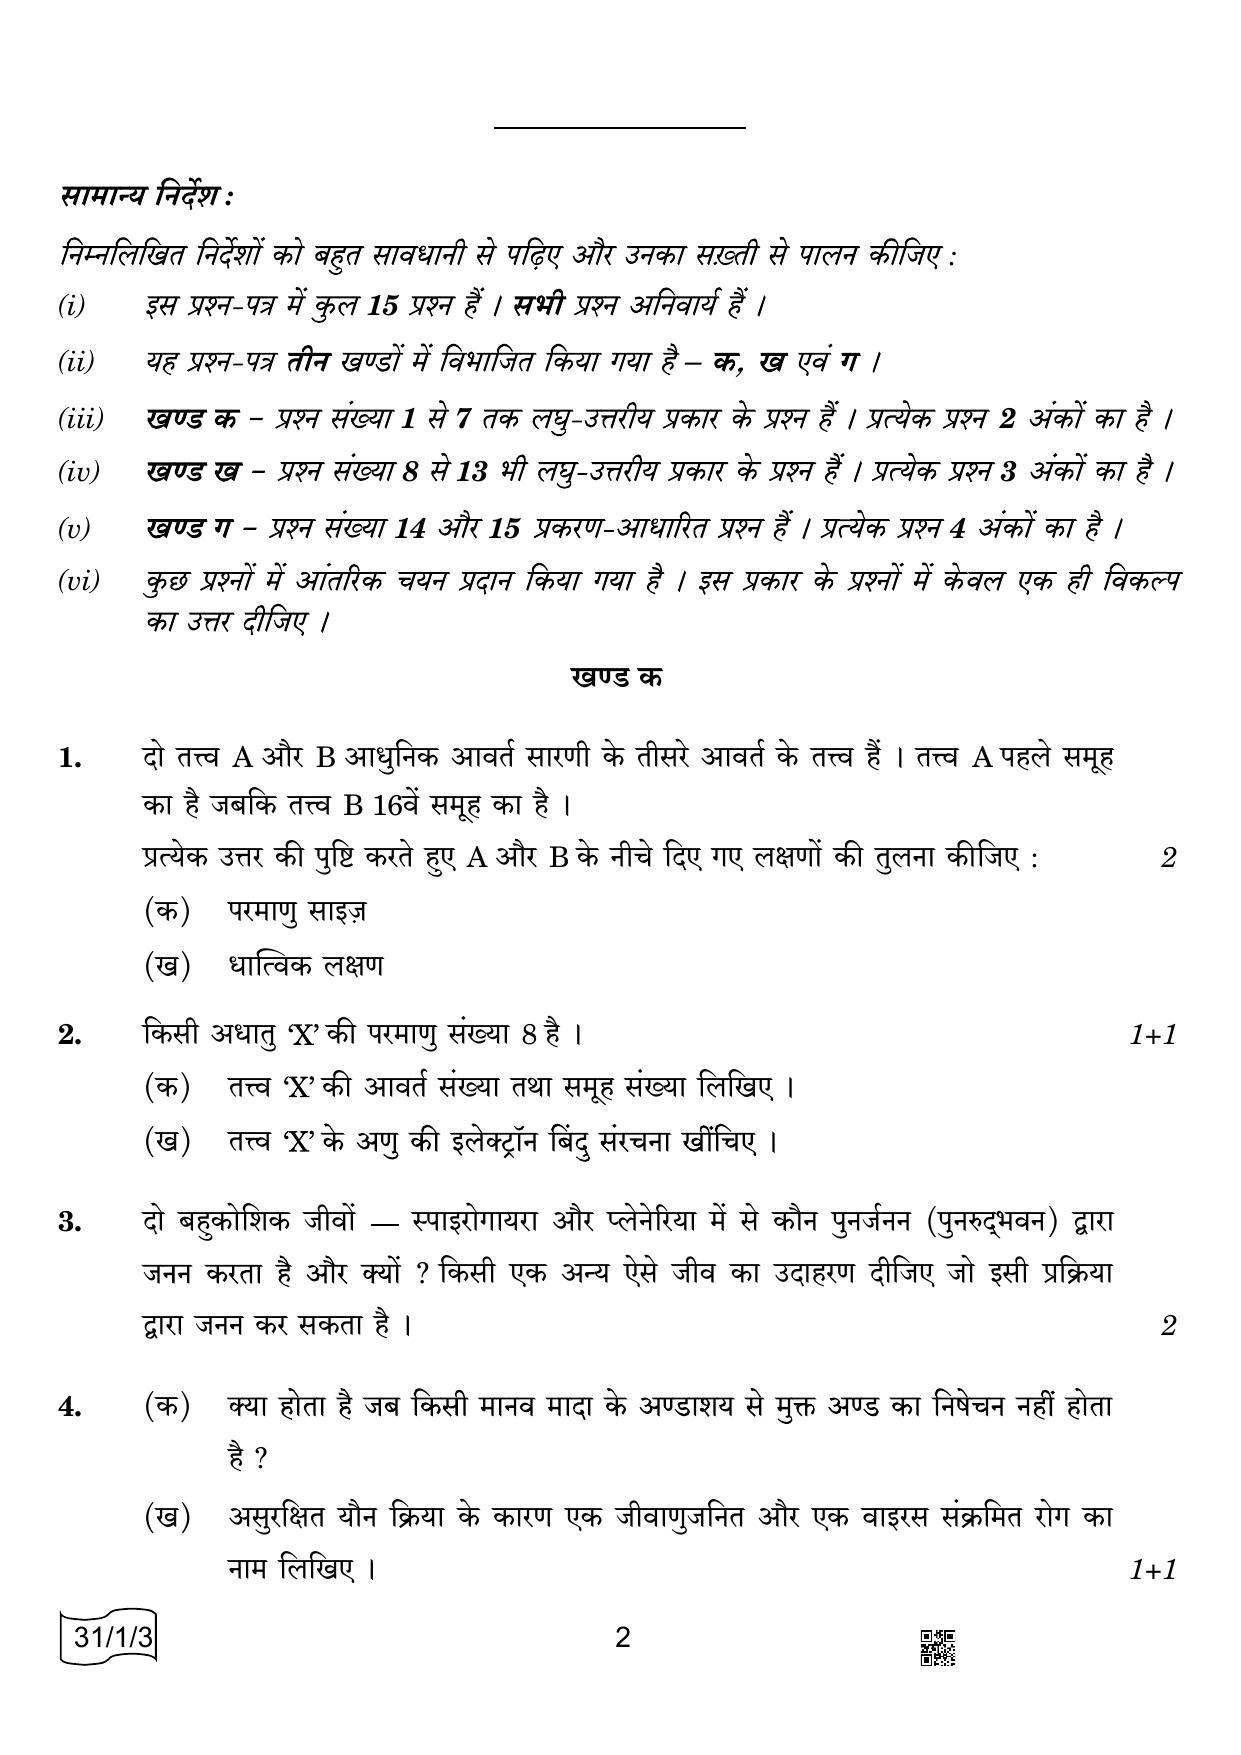 CBSE Class 10 31-1-3 Science 2022 Question Paper - Page 2